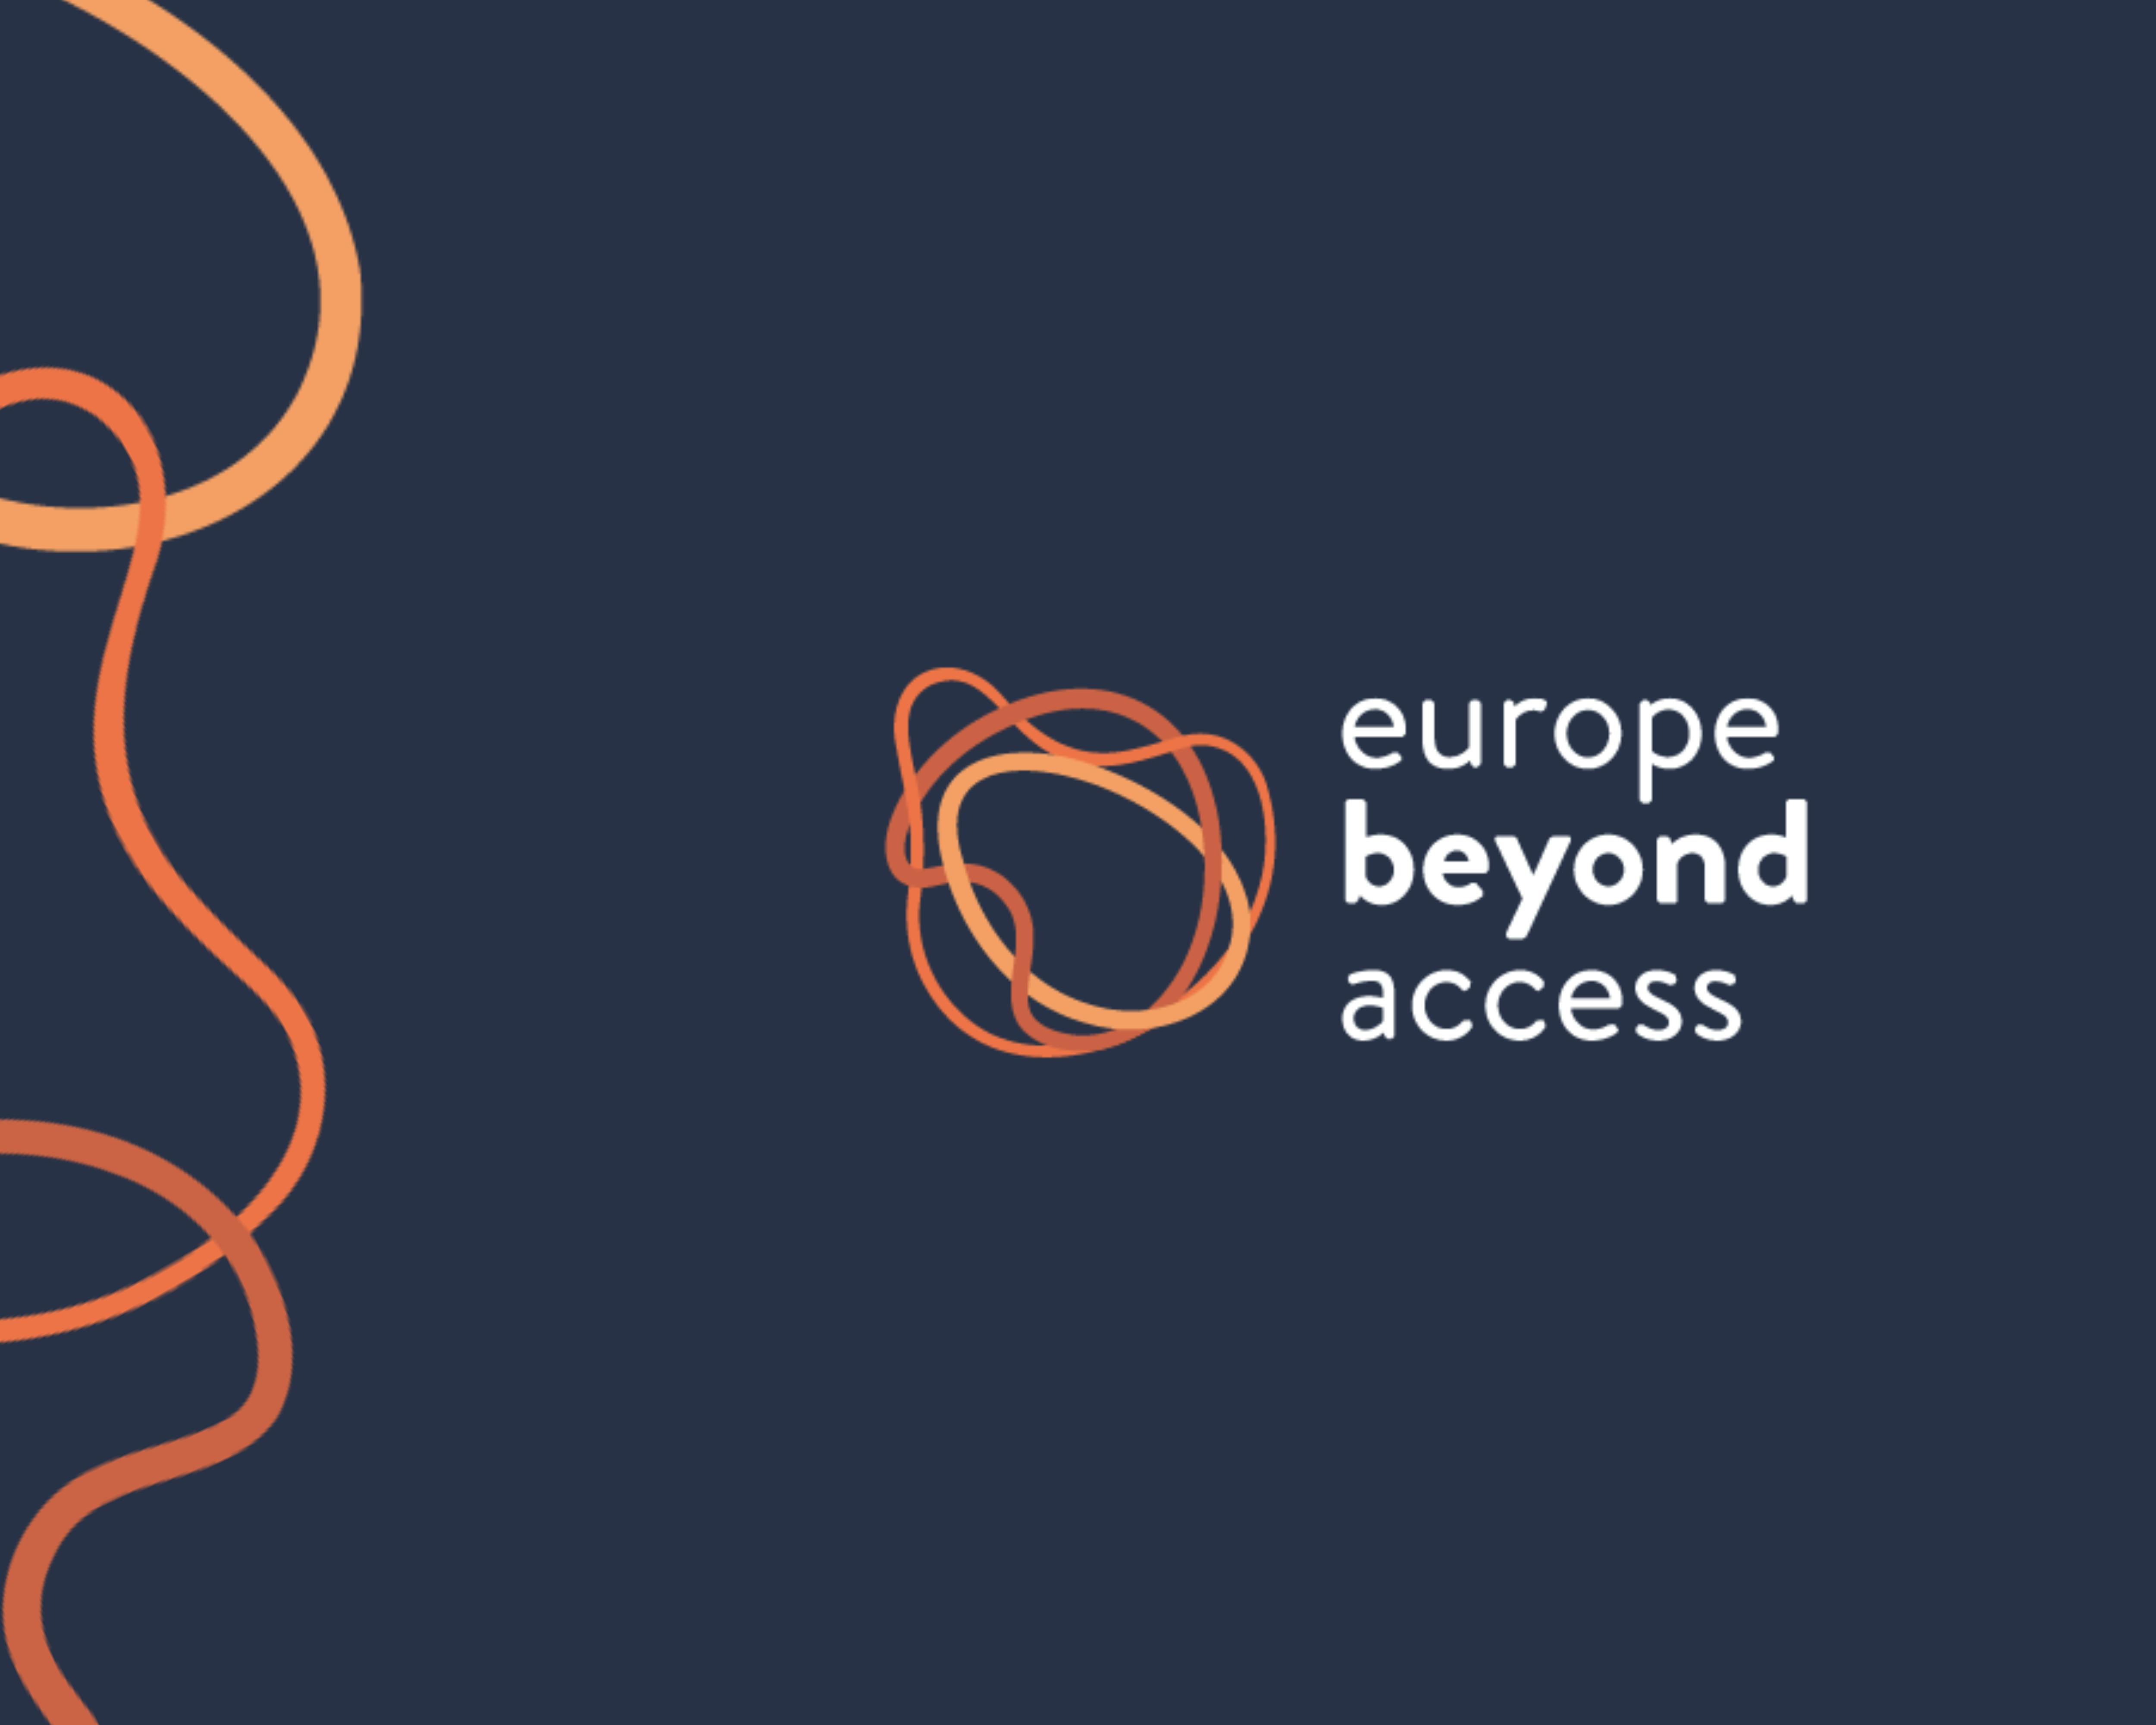 Blue background graphic, white lettering with the words "Europe Beyond Access" and orange graphic illustration